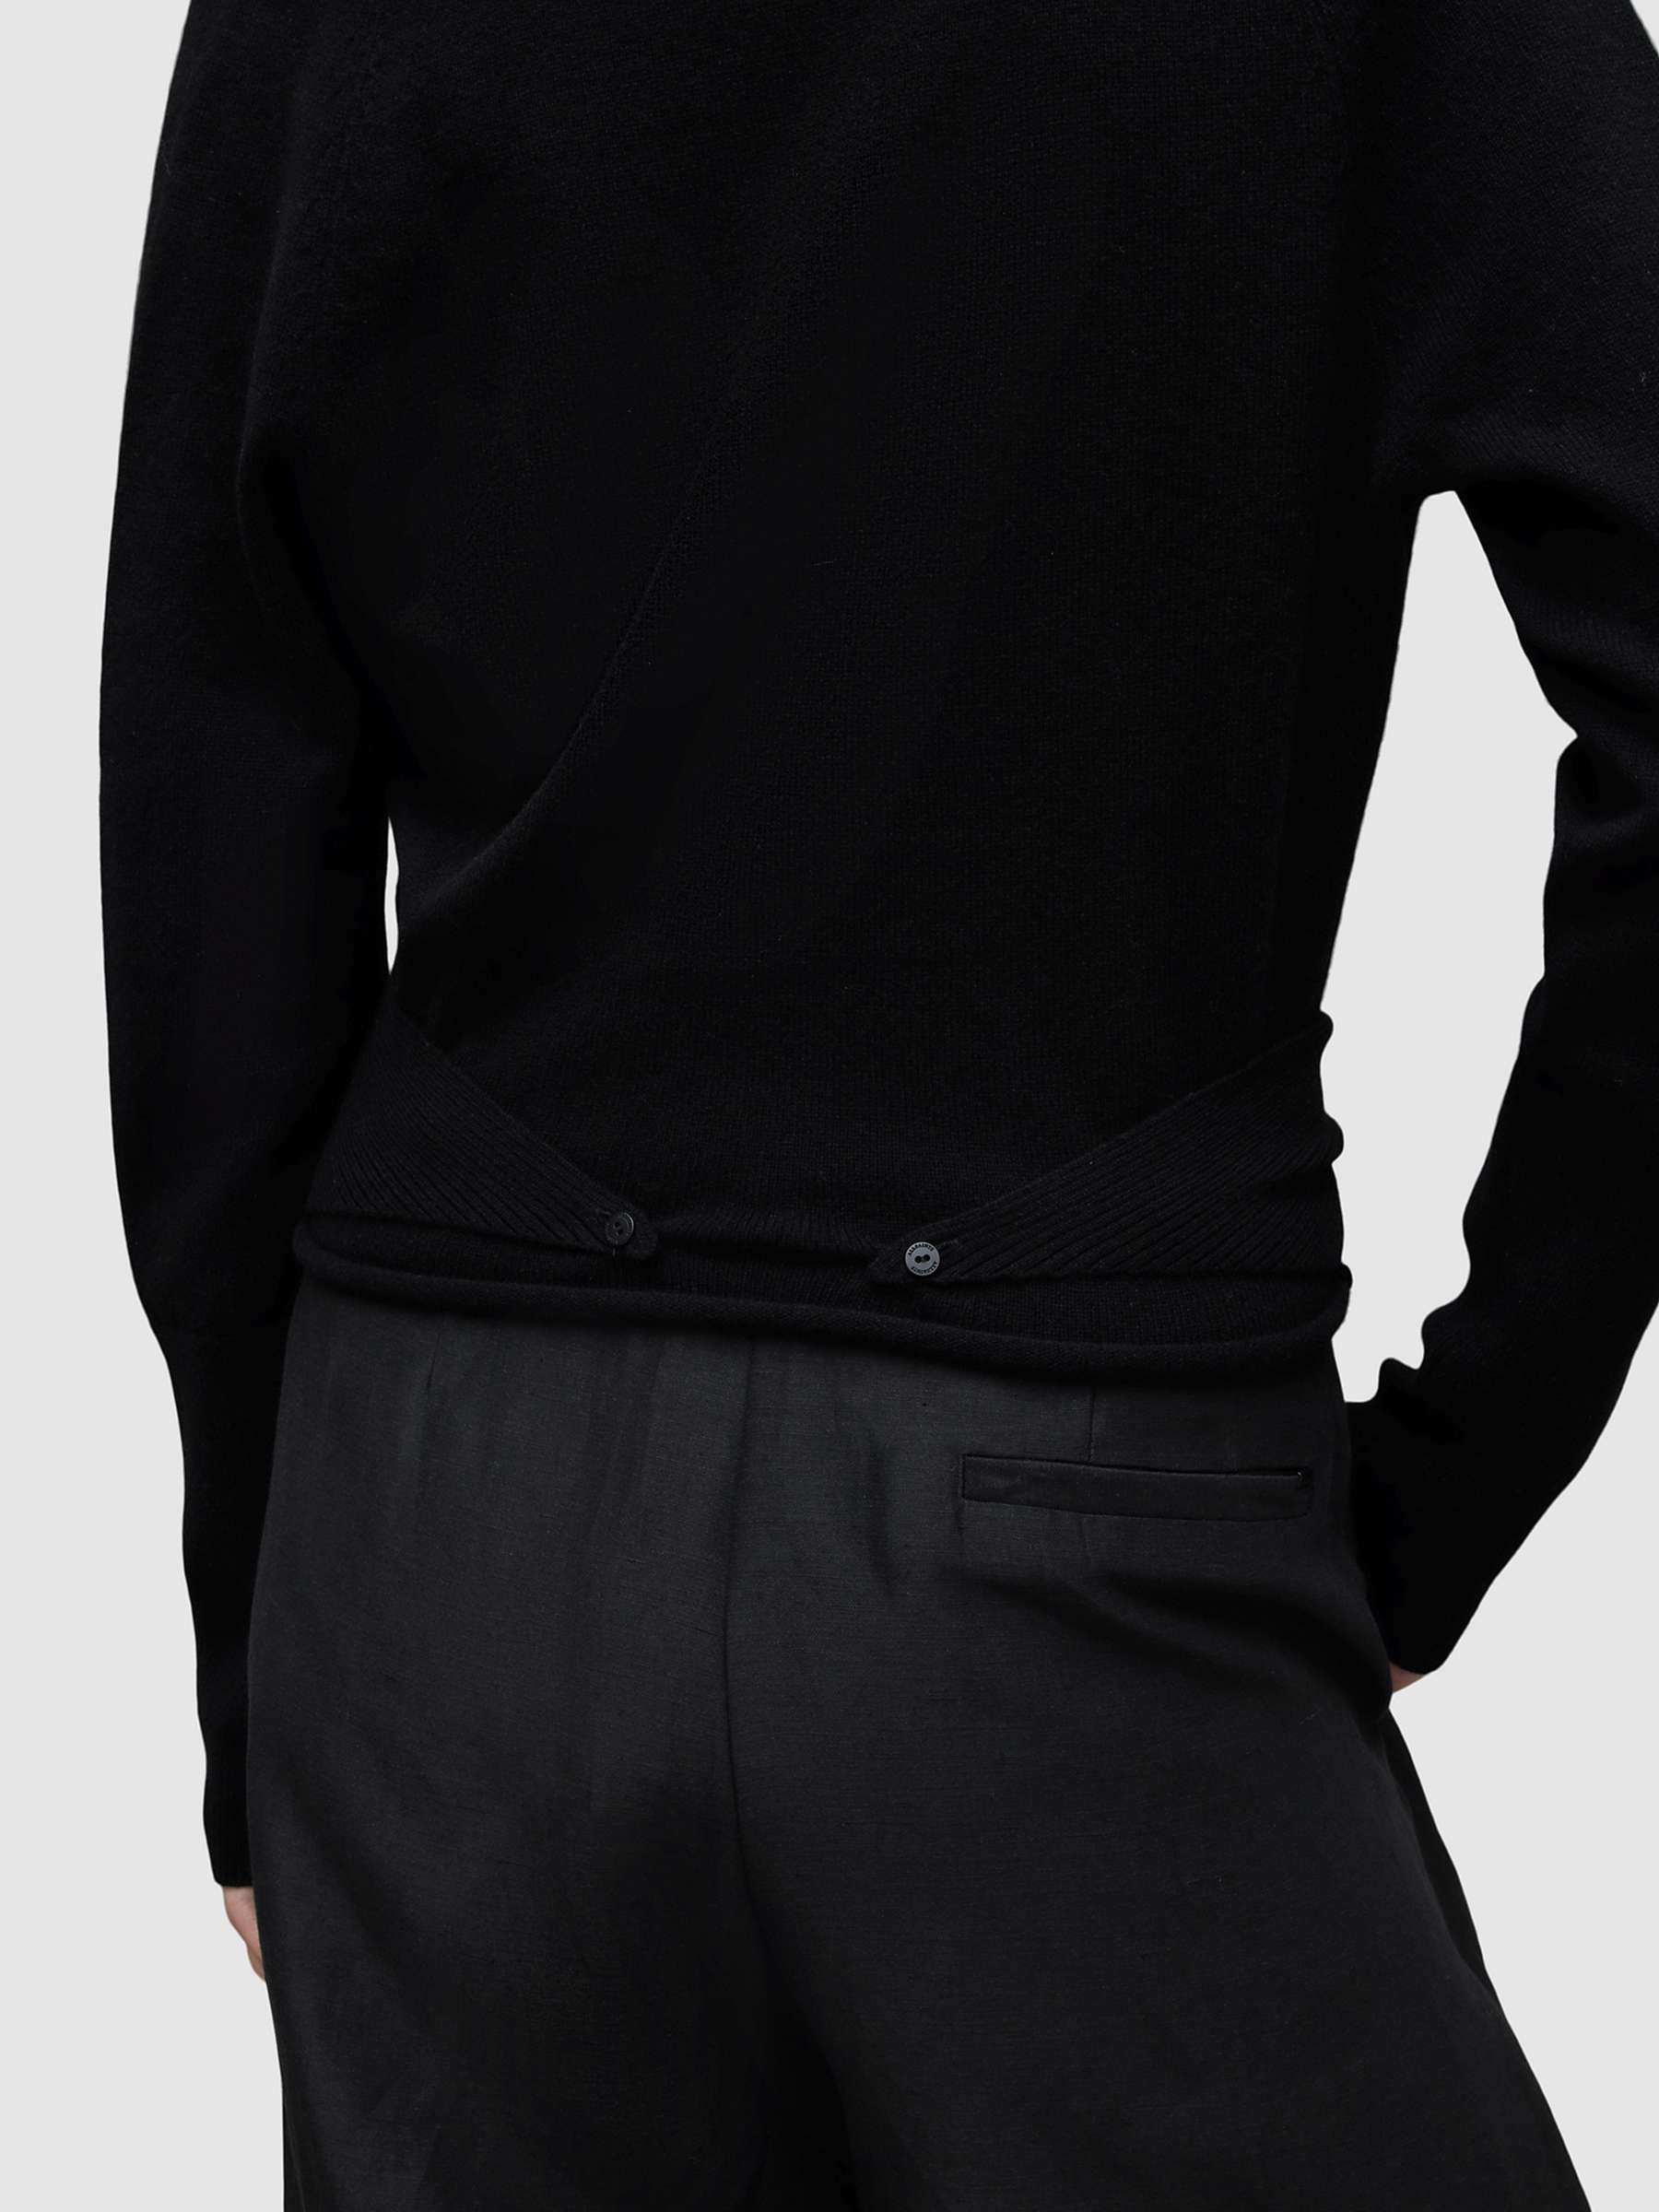 Buy AllSaints Pirate Cashmere Cross Over Cardigan Online at johnlewis.com